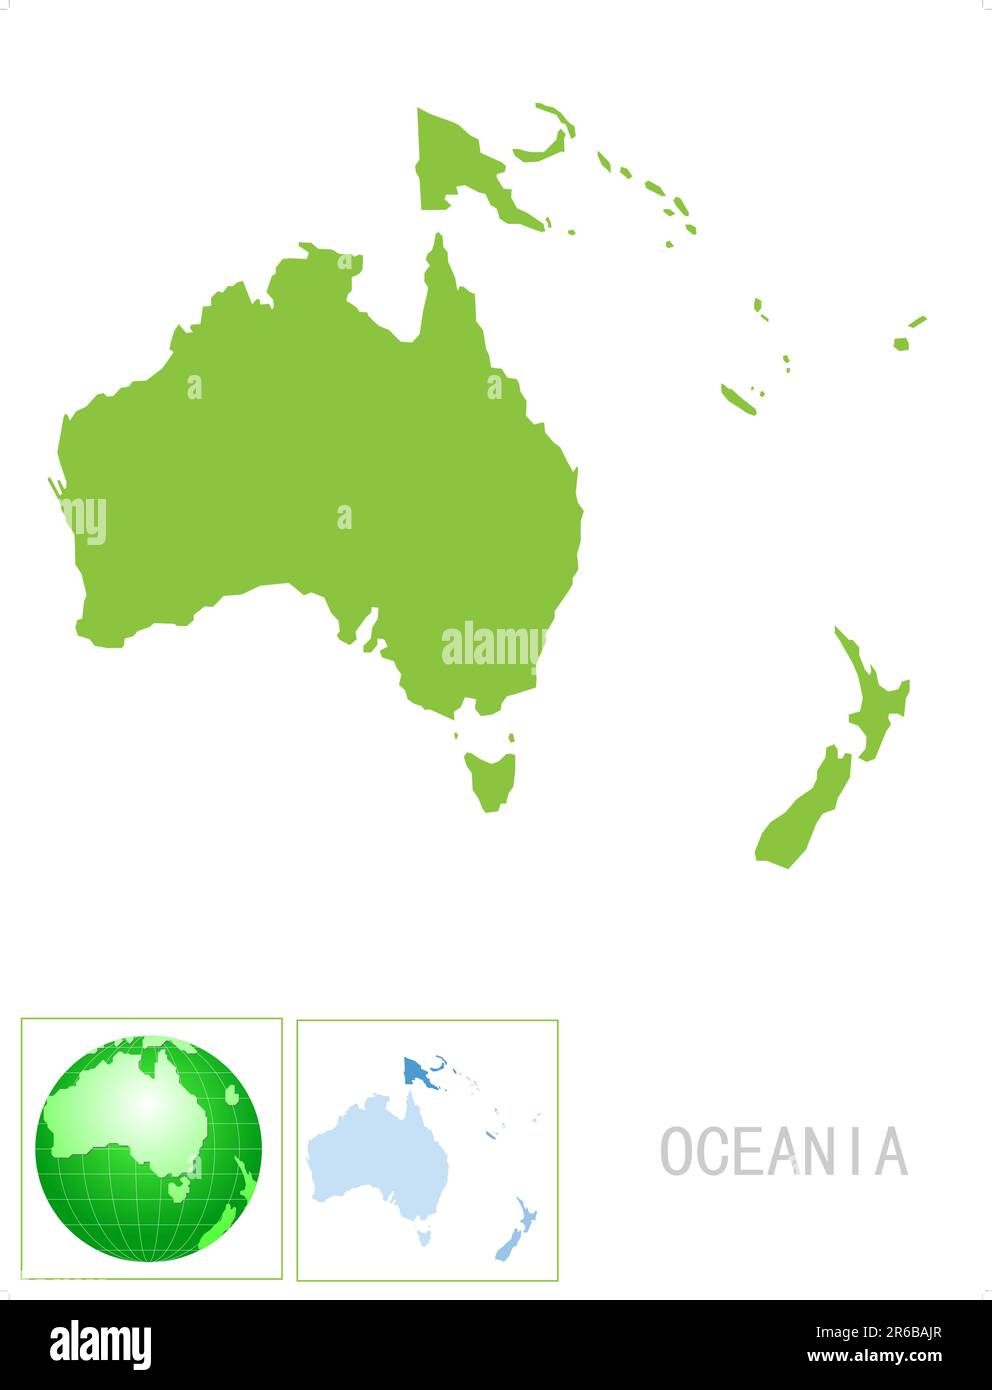 Oceania map and icon on white background Stock Vector